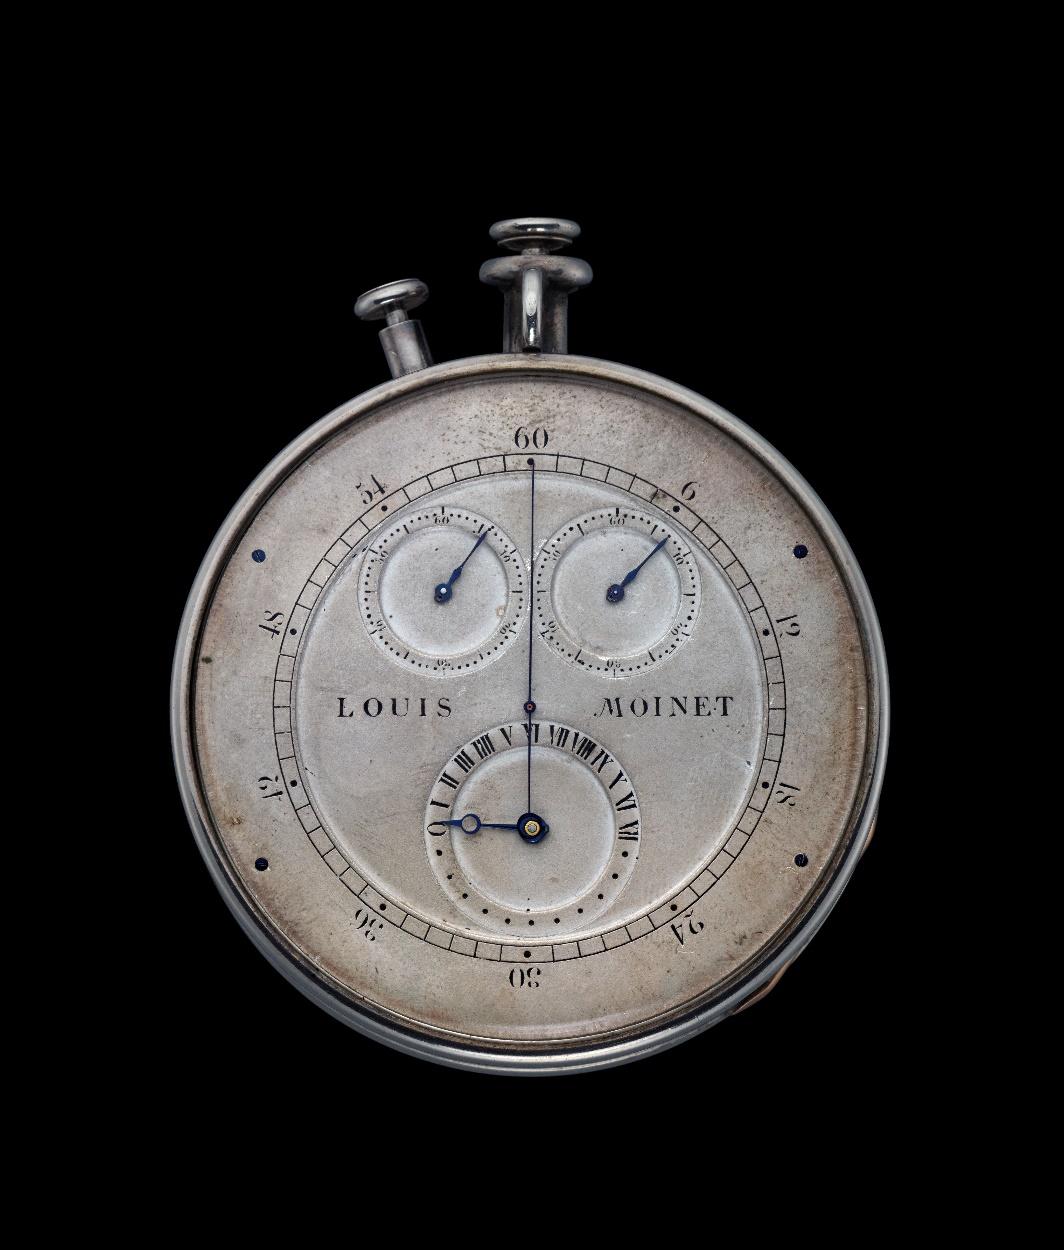 Louis Moinet's ‘Compteur de Tierces’ was the world’s first chronograph and the inceptive high-frequency timepiece. The work on it was started in 1815 and completed in 1816